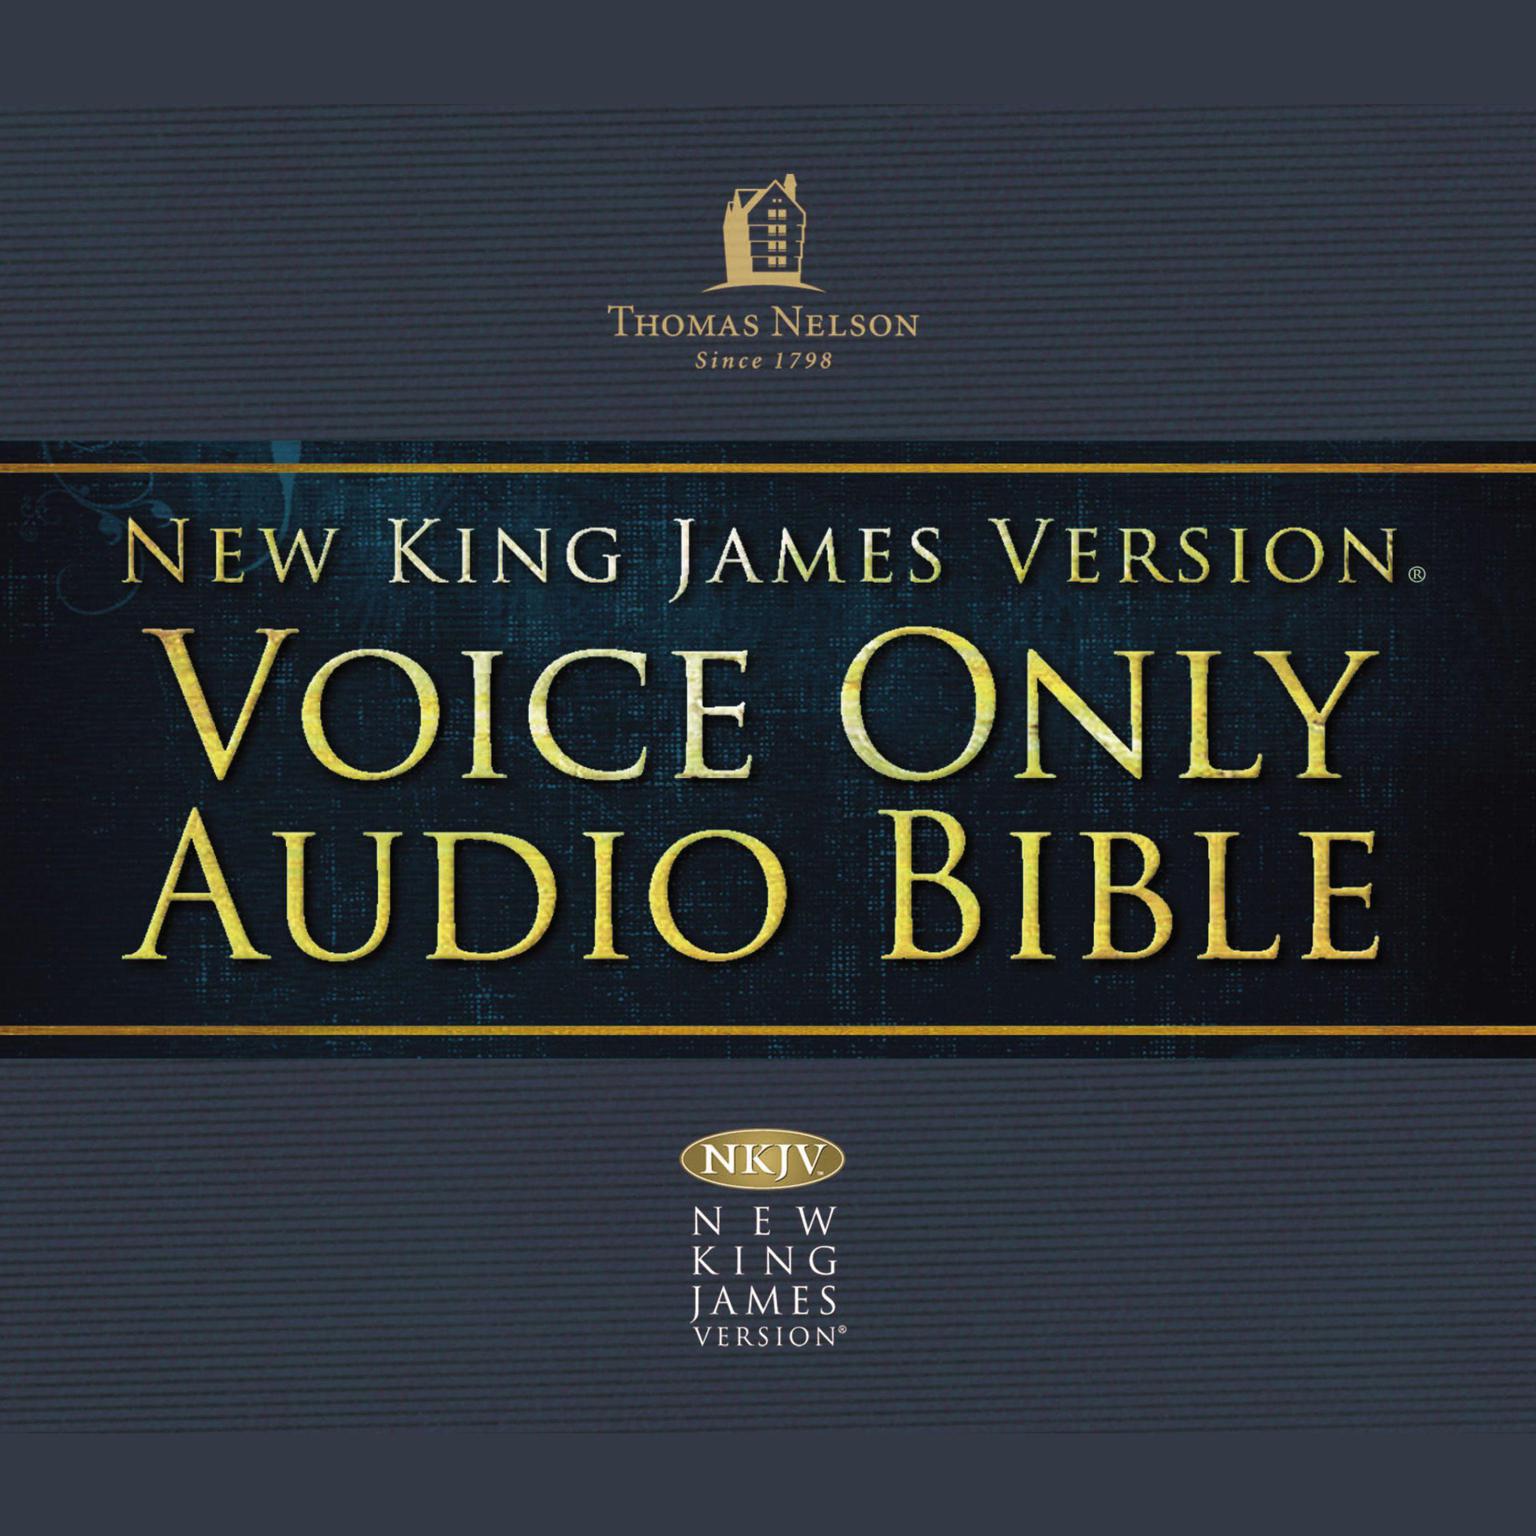 Voice Only Audio Bible - New King James Version, NKJV (Narrated by Bob Souer): (31) Galatians, Ephesians, Philippians, and Colossians: Holy Bible, New King James Version Audiobook, by Thomas Nelson